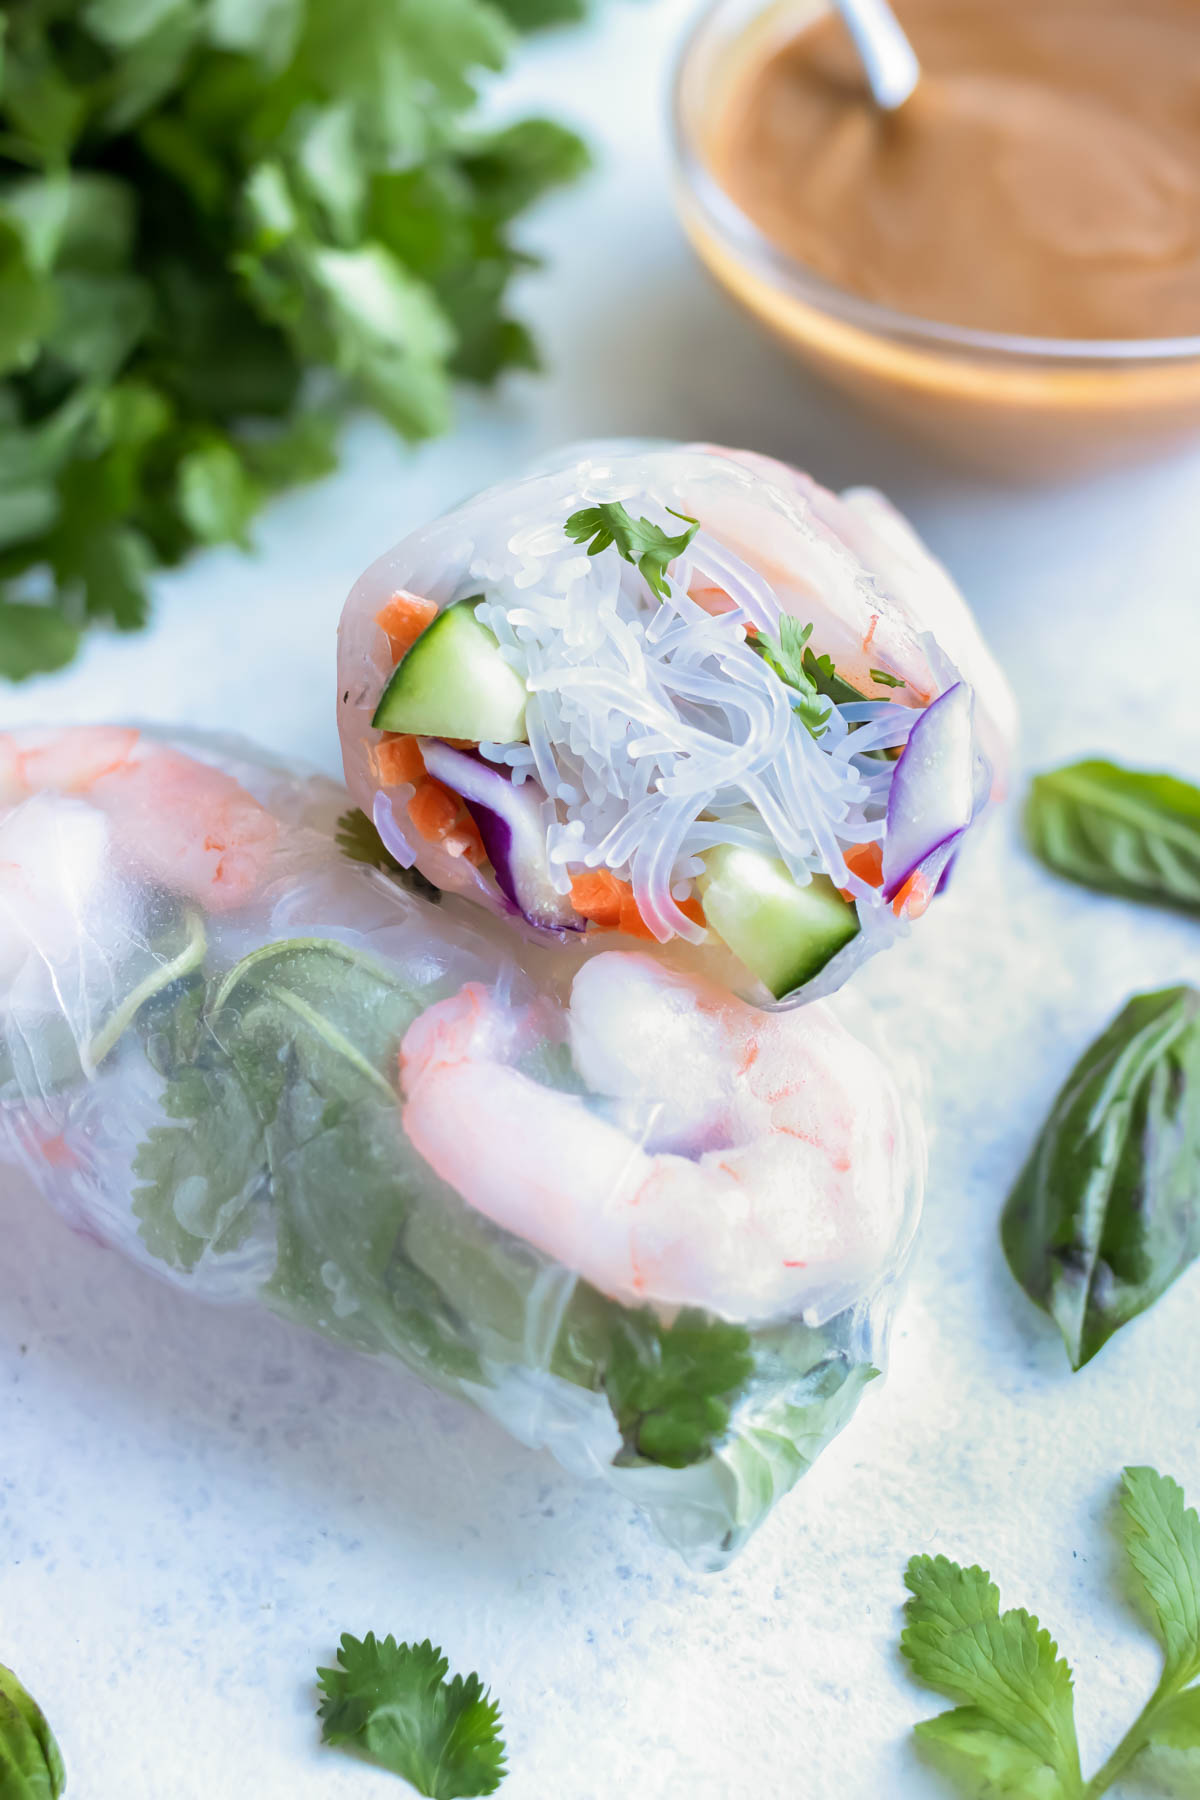 How to Make Fresh Spring Rolls